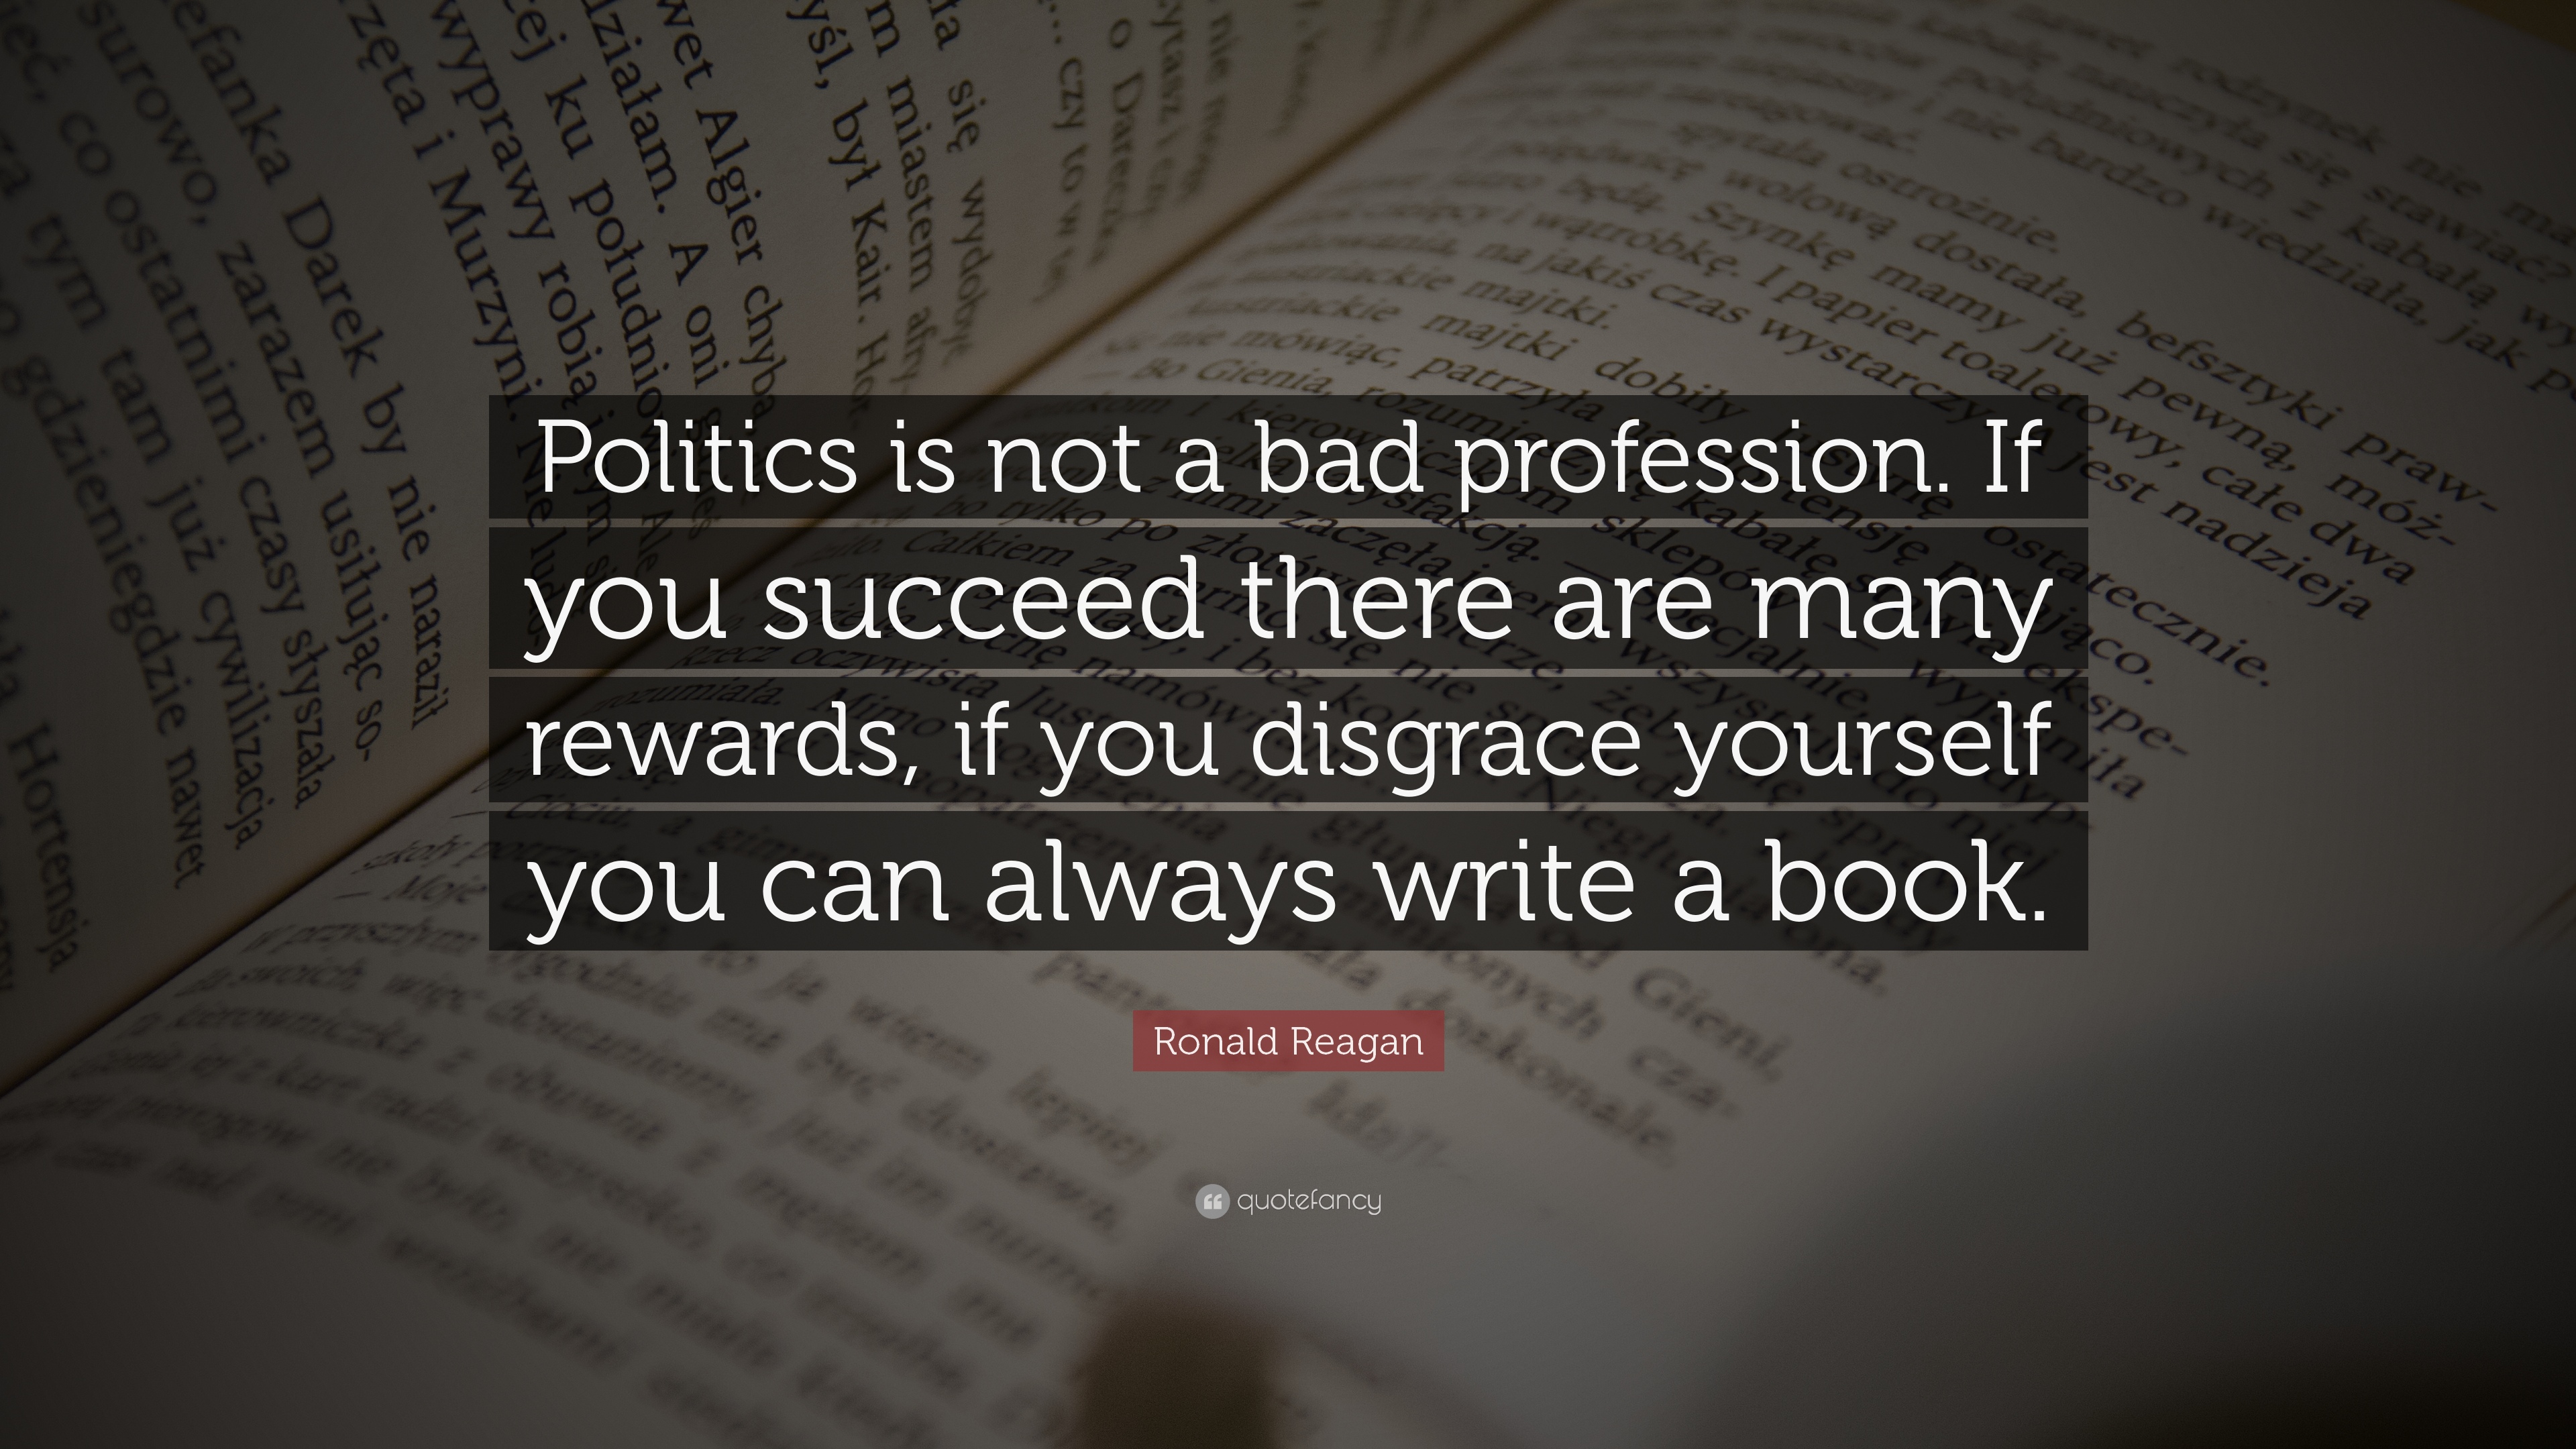 Quotes On Politics Image In Collection